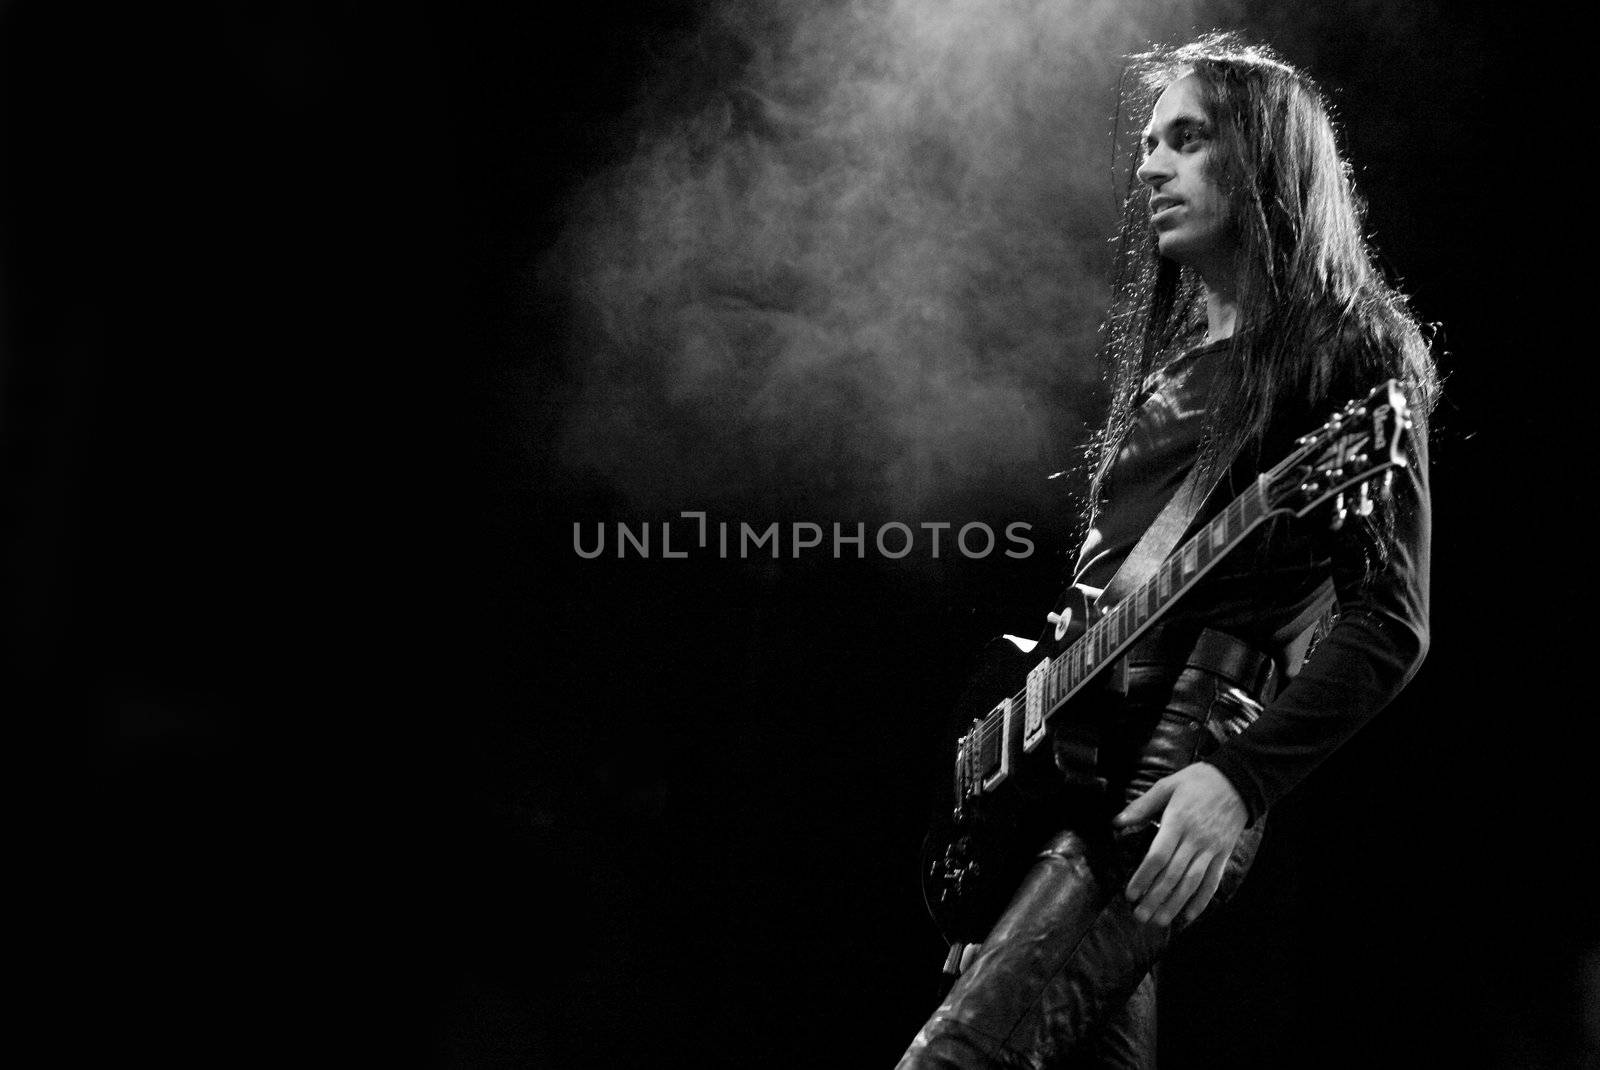 Photo's made at a live concert of a rock and metal band